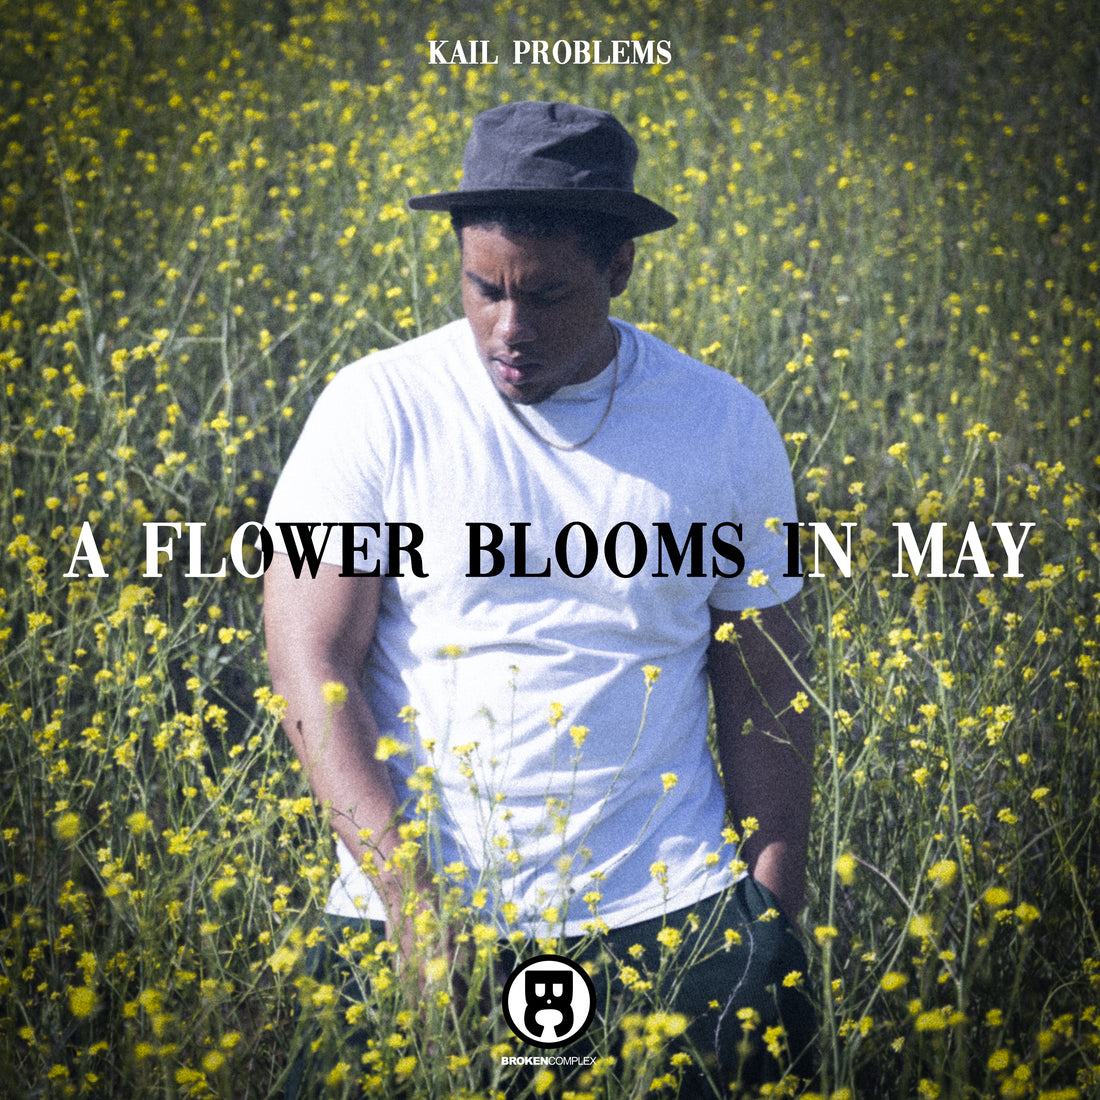 New Album: Kail Problems - A Flower Blooms In May